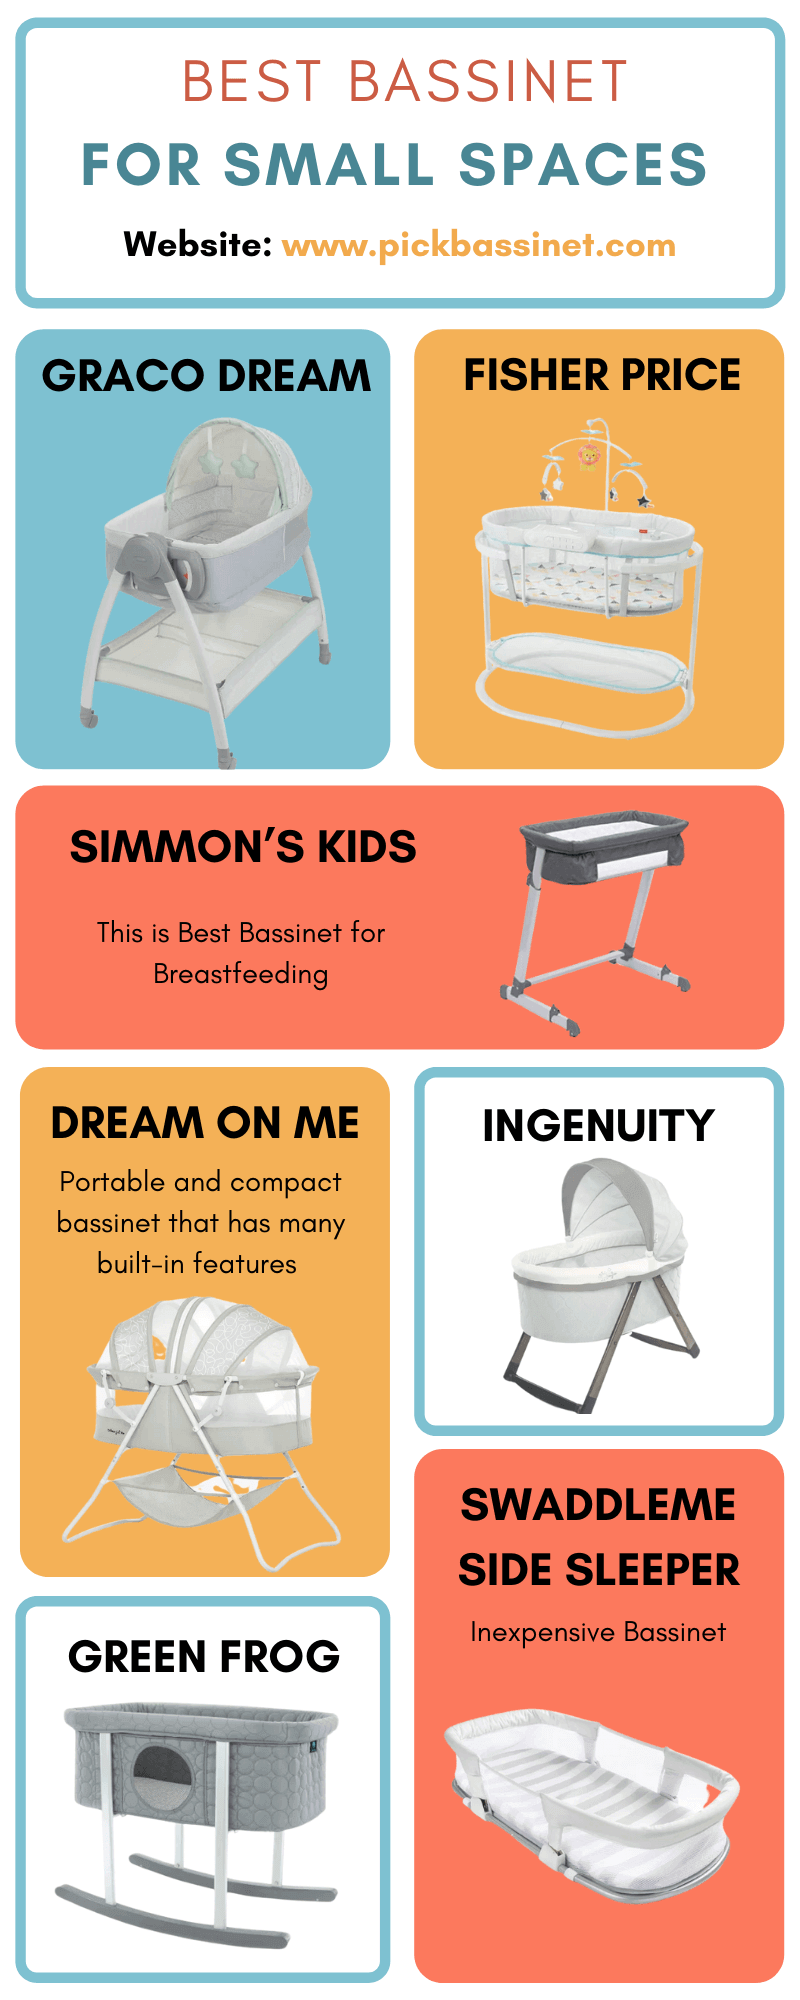 Best Bassinet for Small Spaces Infographic